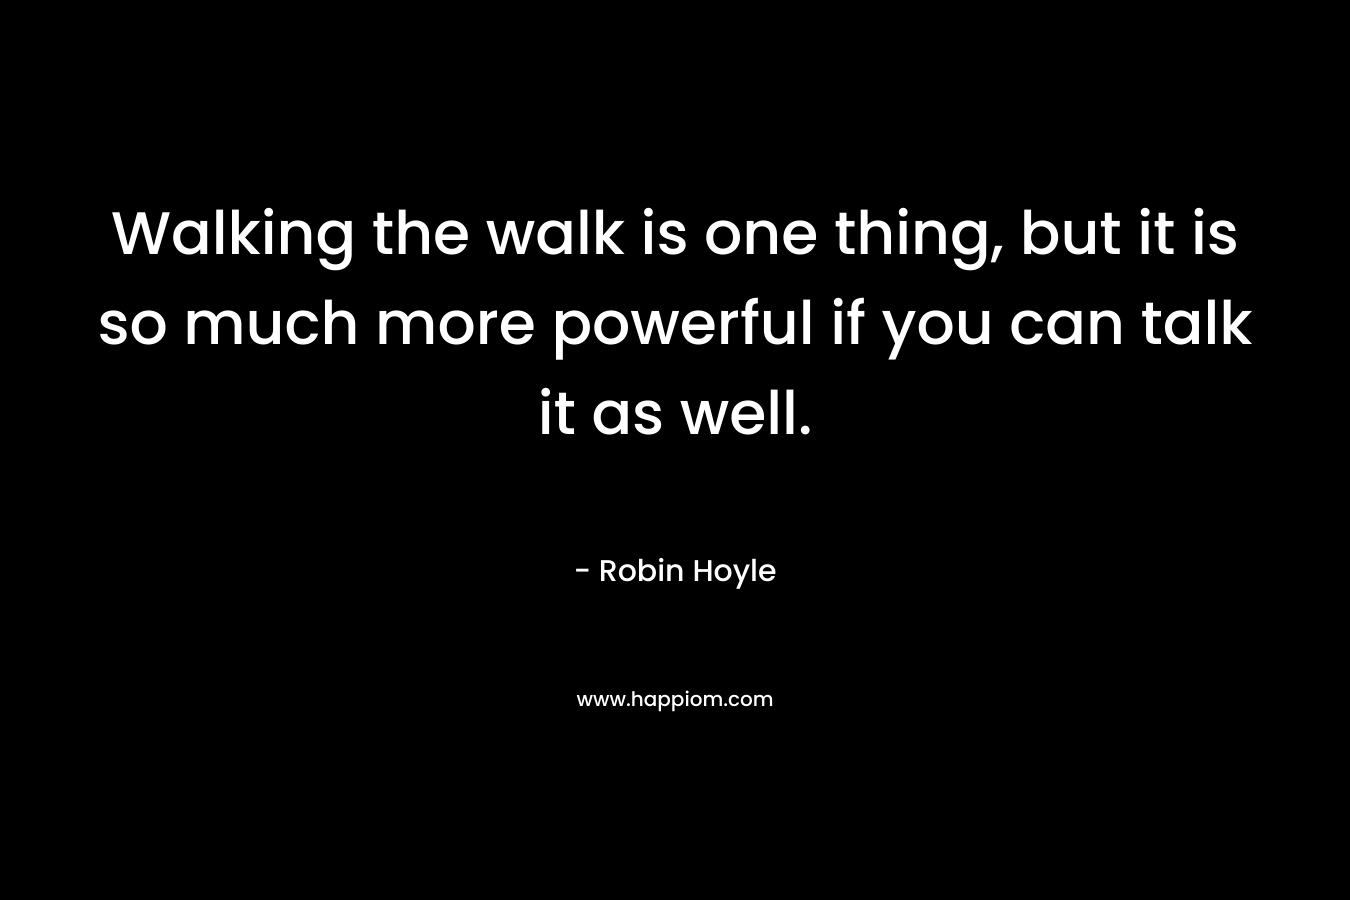 Walking the walk is one thing, but it is so much more powerful if you can talk it as well. – Robin Hoyle